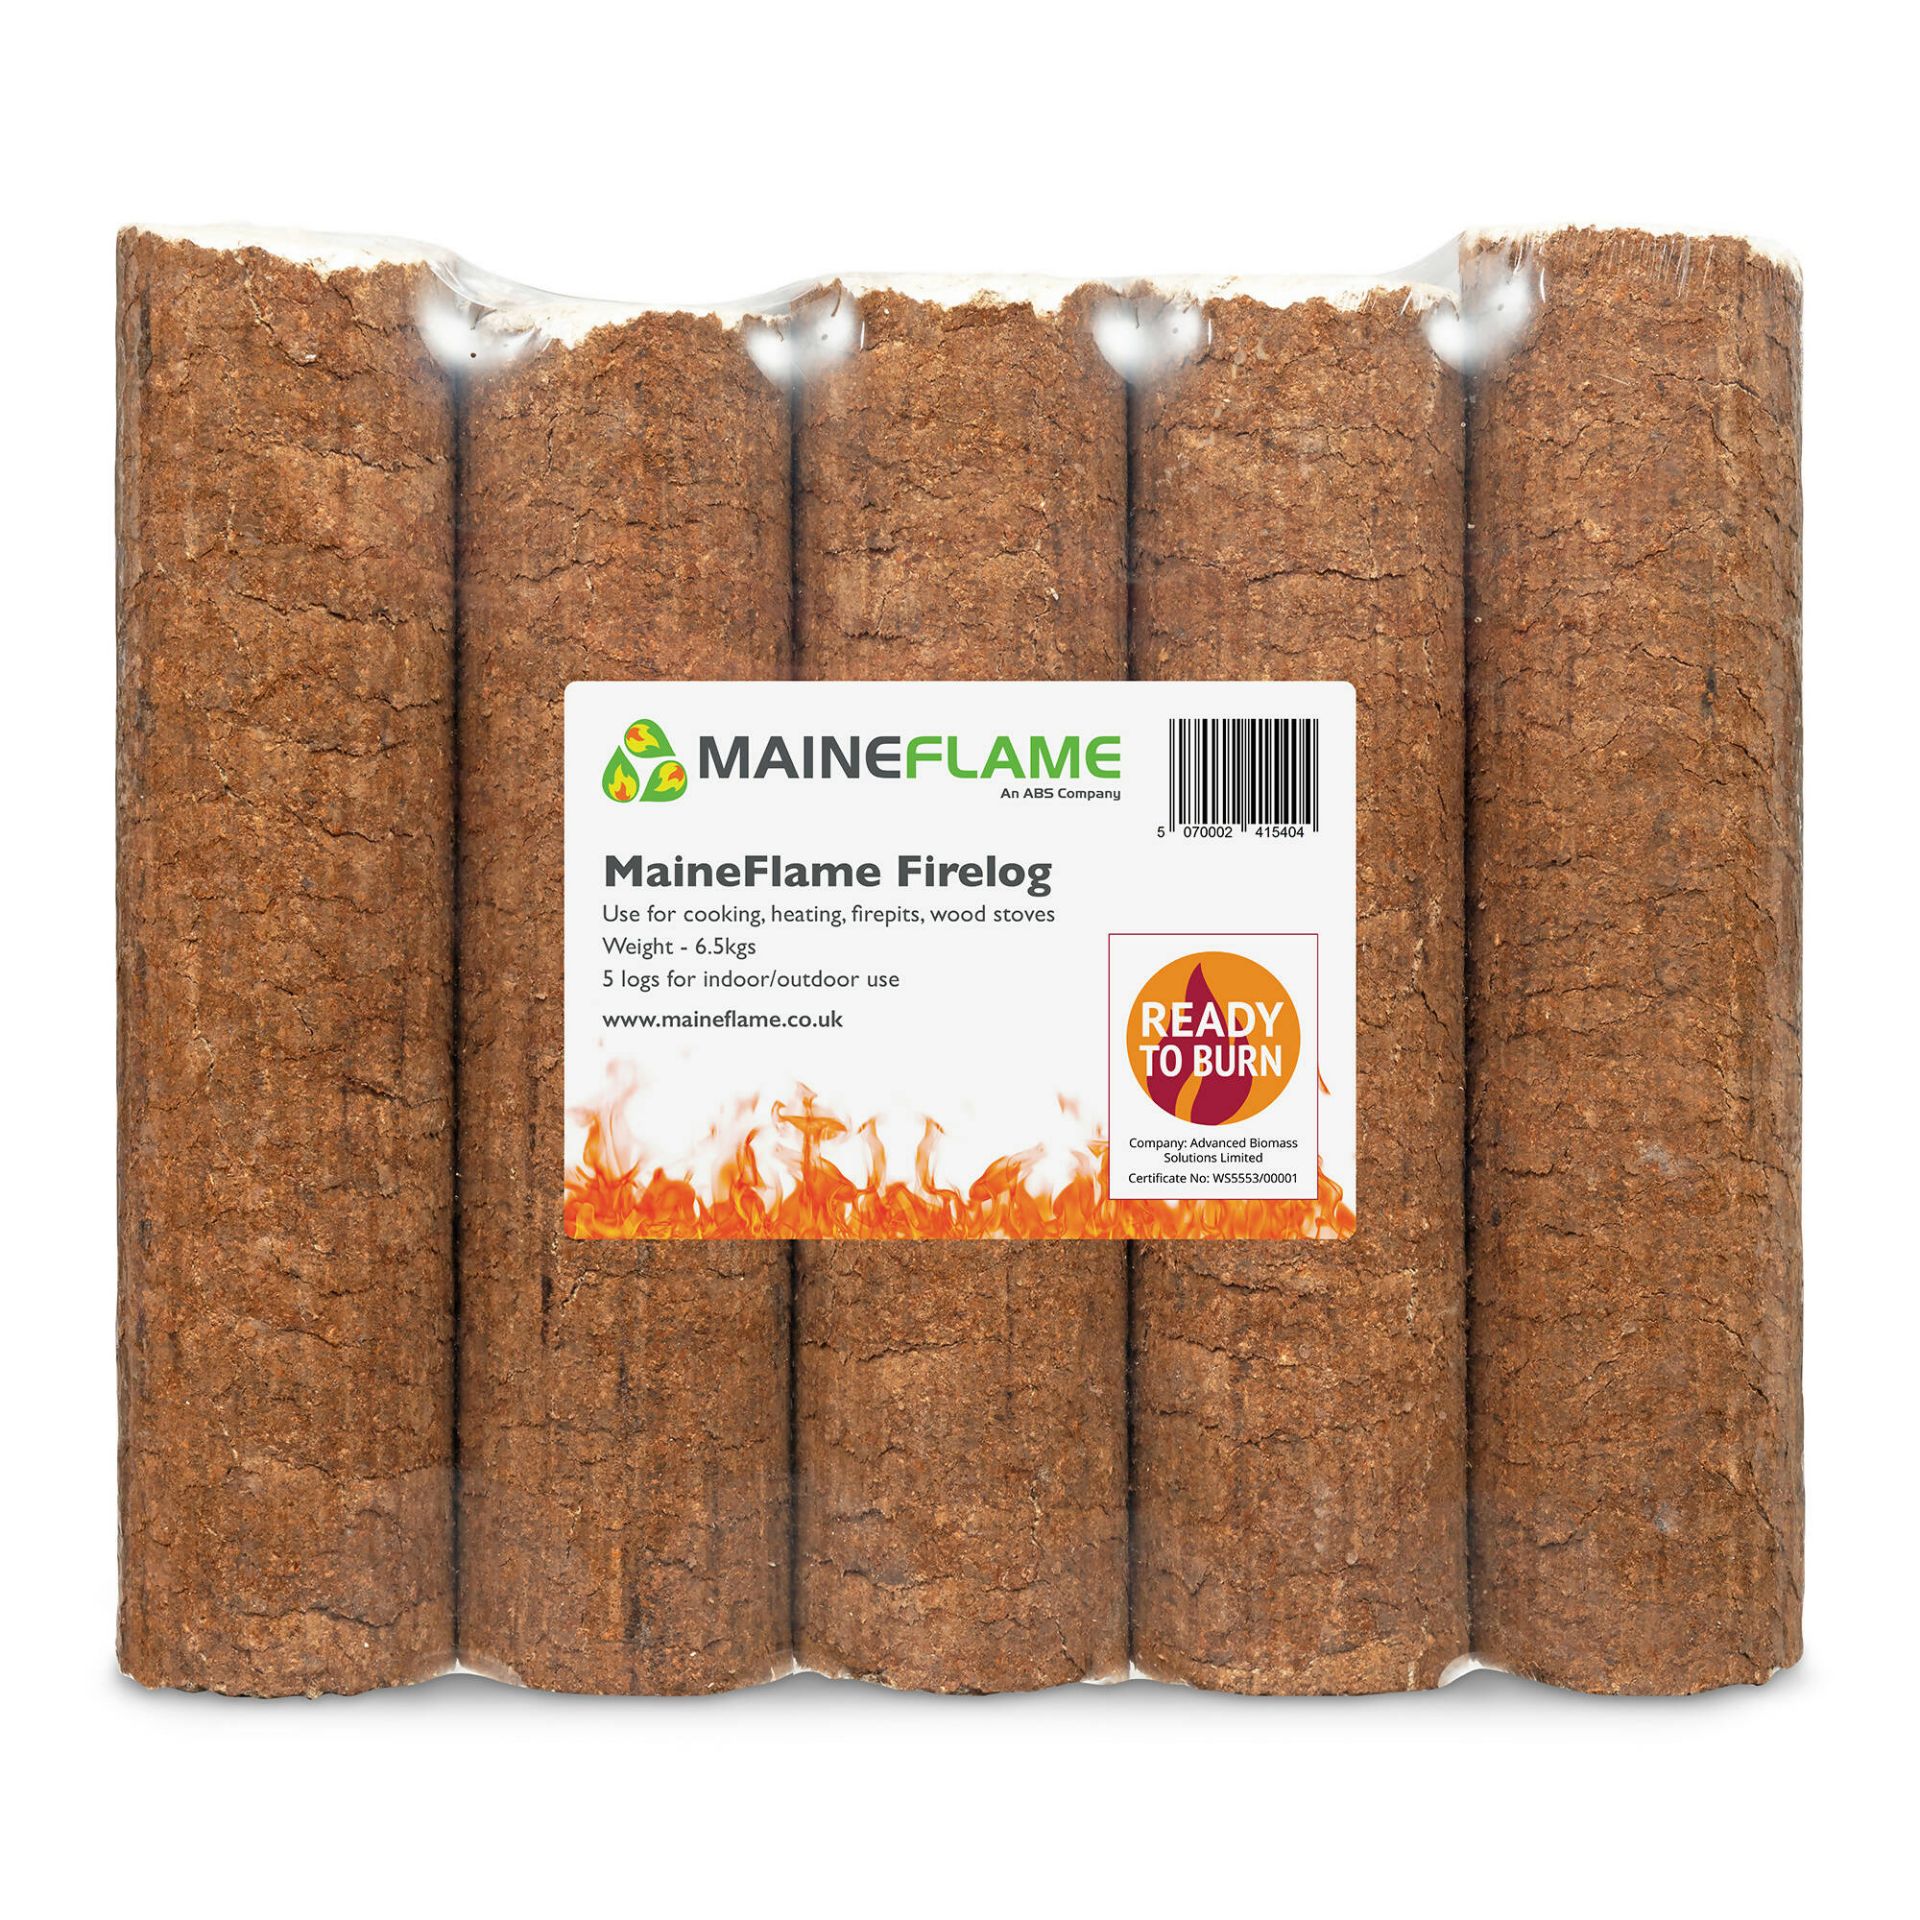 TRUCKLOAD = 26 PALLETS OF PRESSED FIRE LOGS (3,900 X 5 PACKS = 19,500 LOGS) - RRP £23,400 - Image 2 of 3